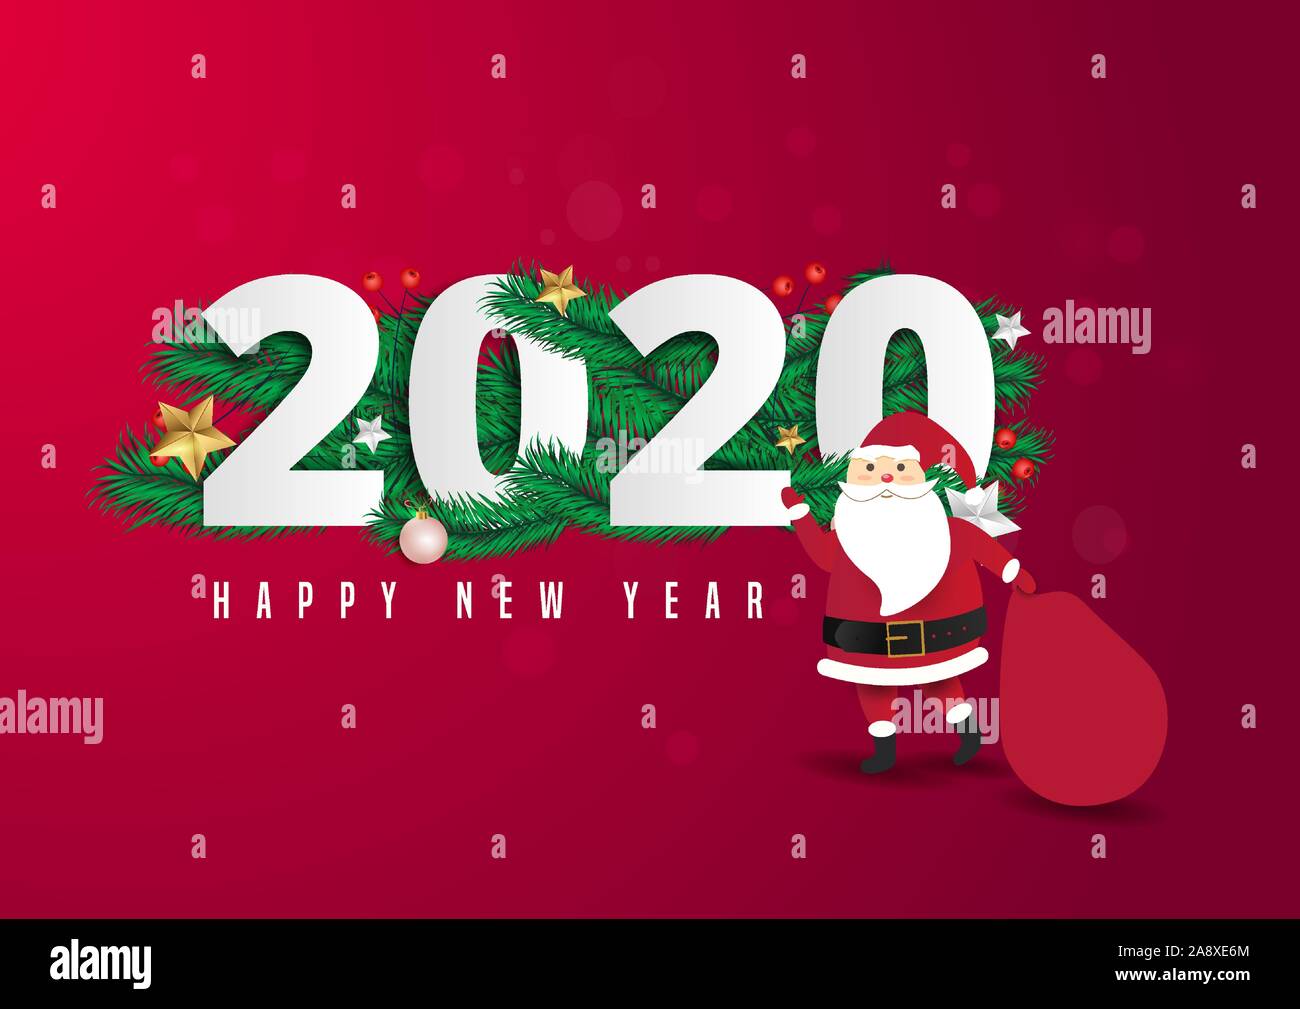 Santa Claus with a huge bag on the walk to deliver christmas gifts at red background. 2020 and happy new year text Lettering Vector illustration. Stock Vector